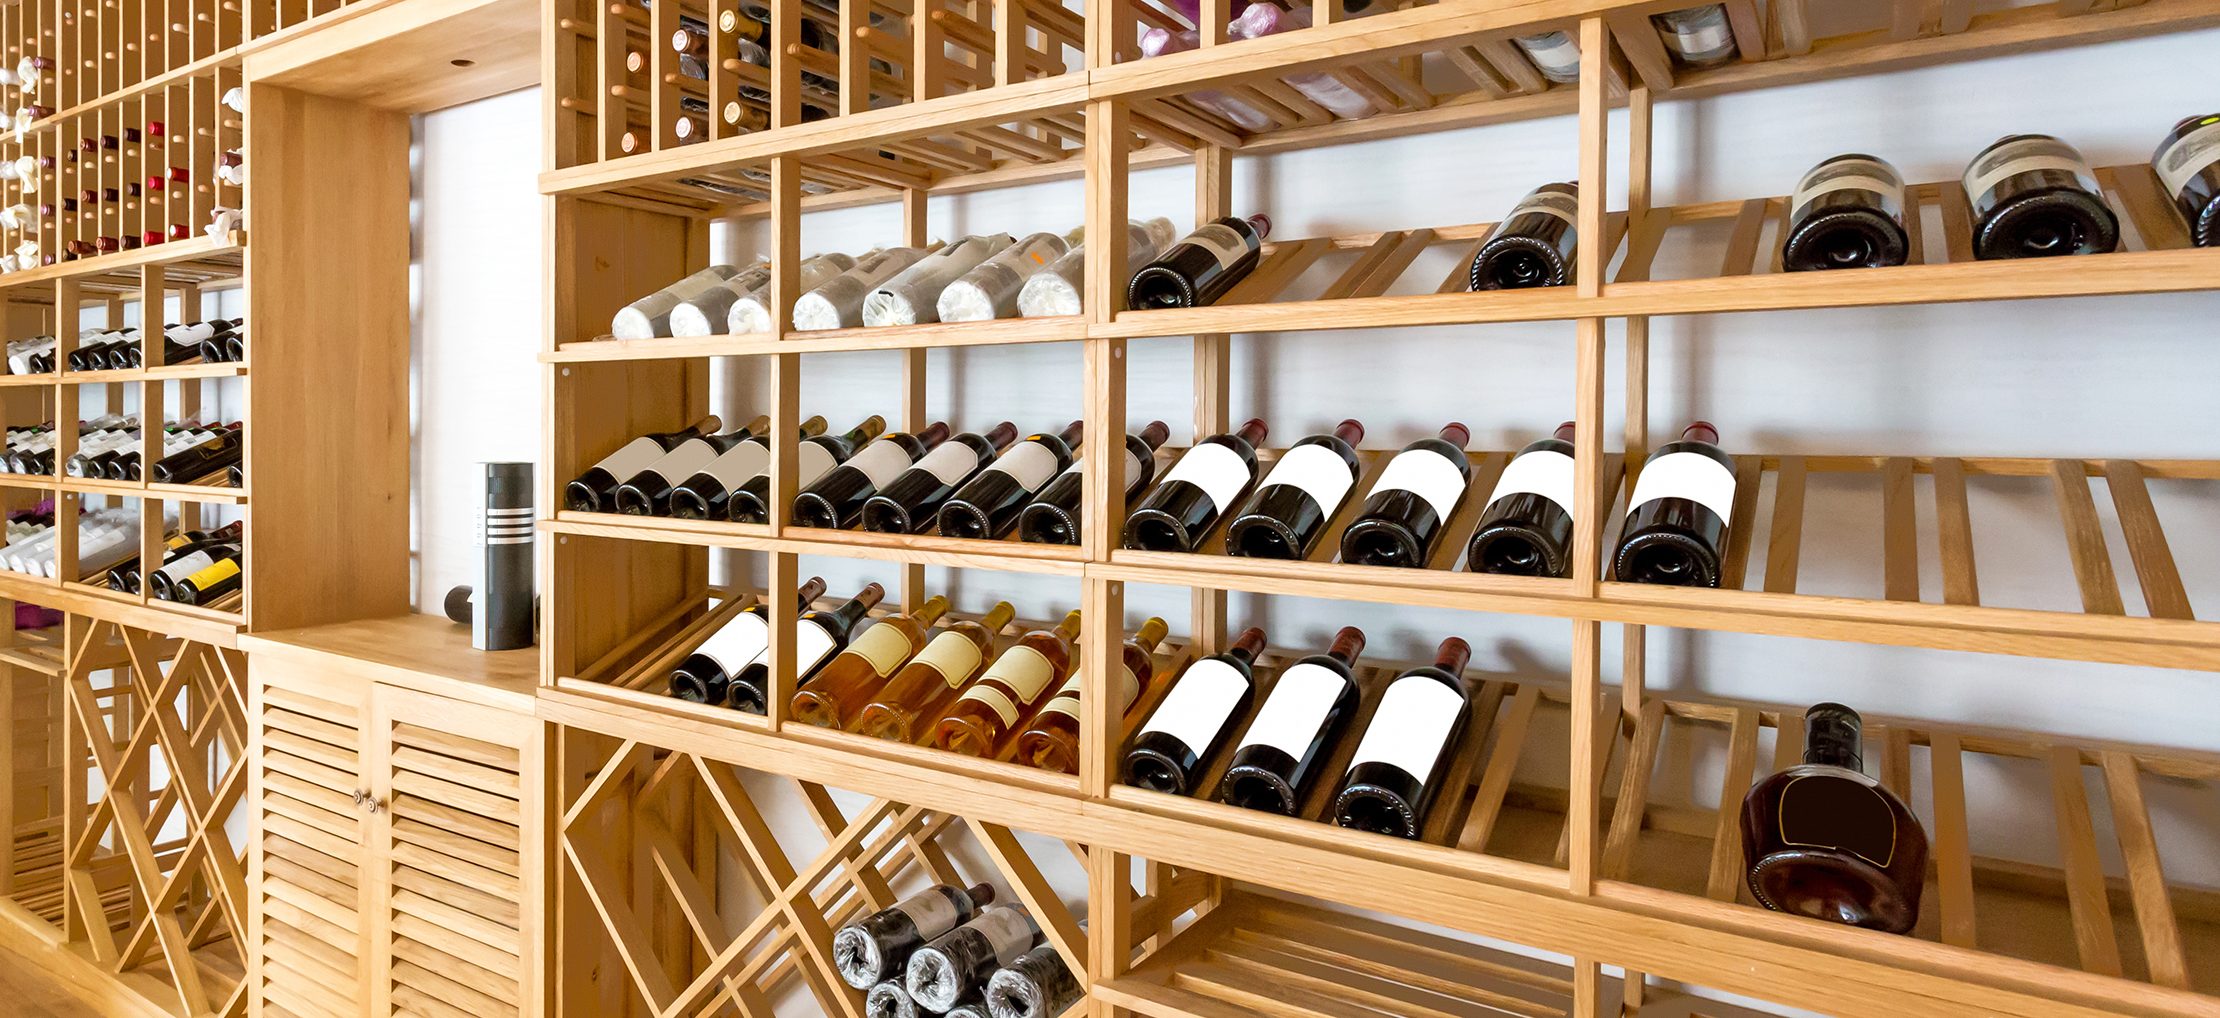 Recommendations for Wine Racks – Part 2